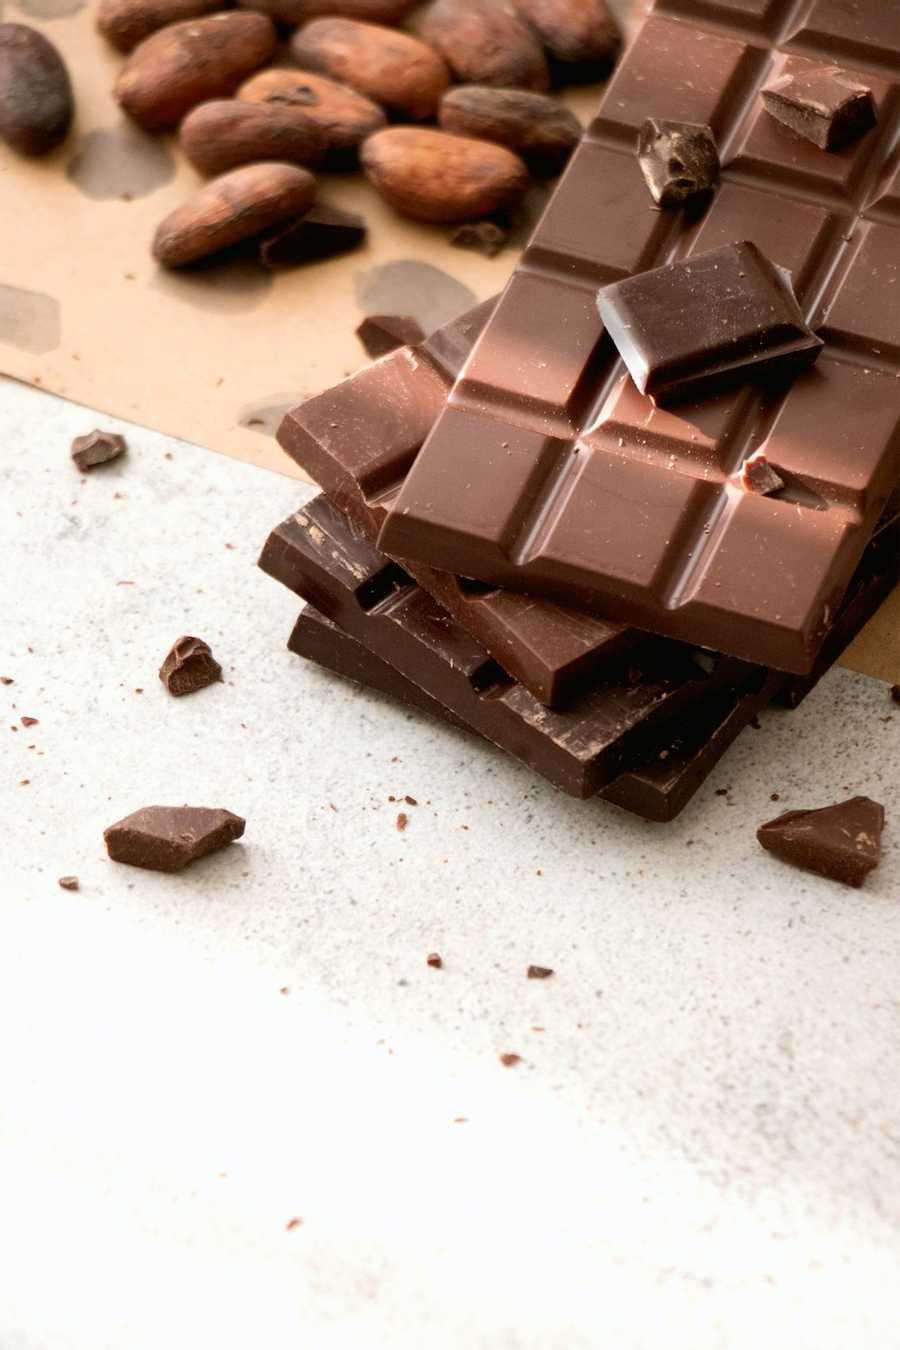 Eating chocolate can make your skin look healthier